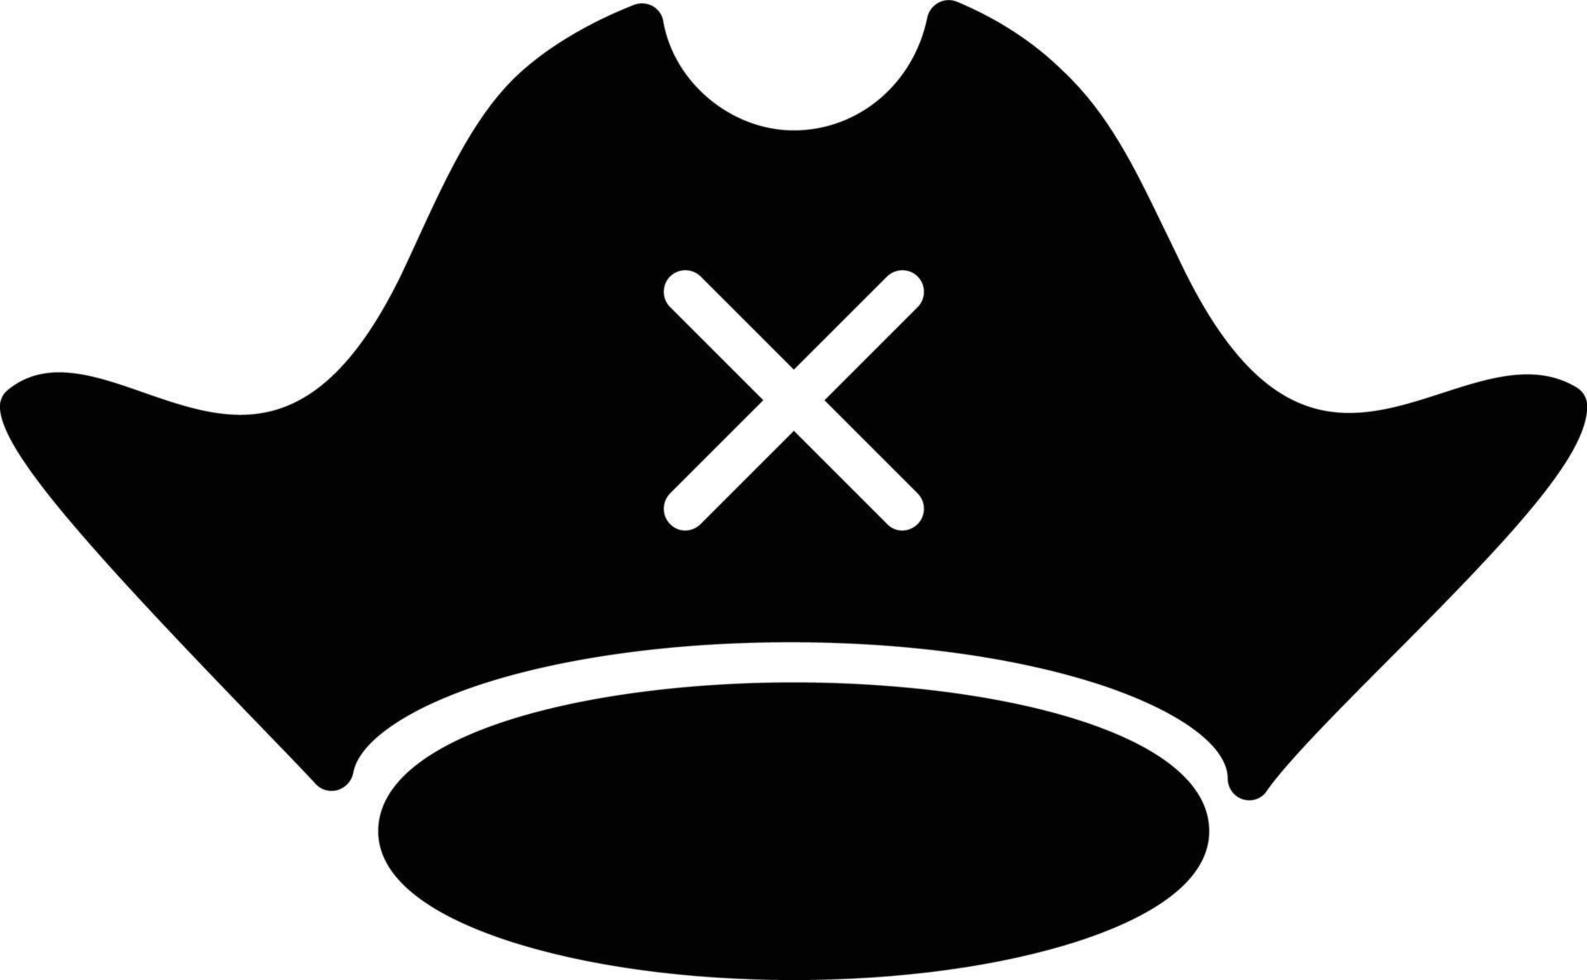 Pirate Hat Glyph Icon vector